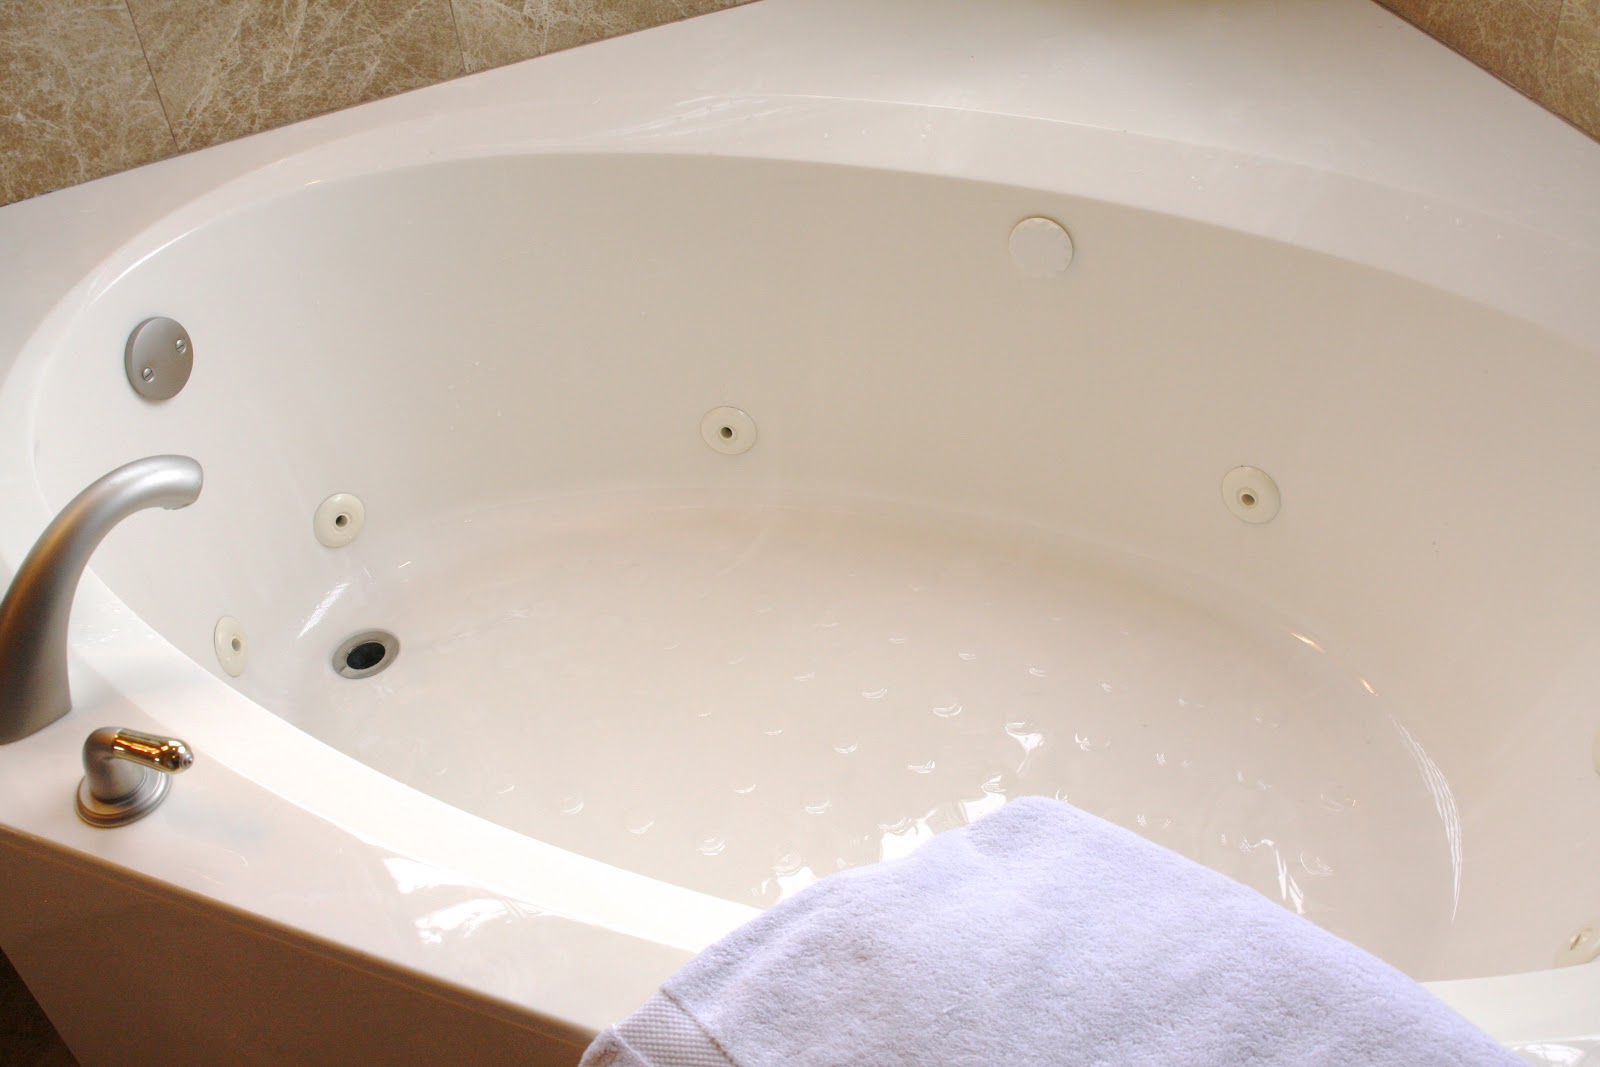 How To Clean Whirlpool Tub Jets, How To Clean Whirlpool Bathtub Jets